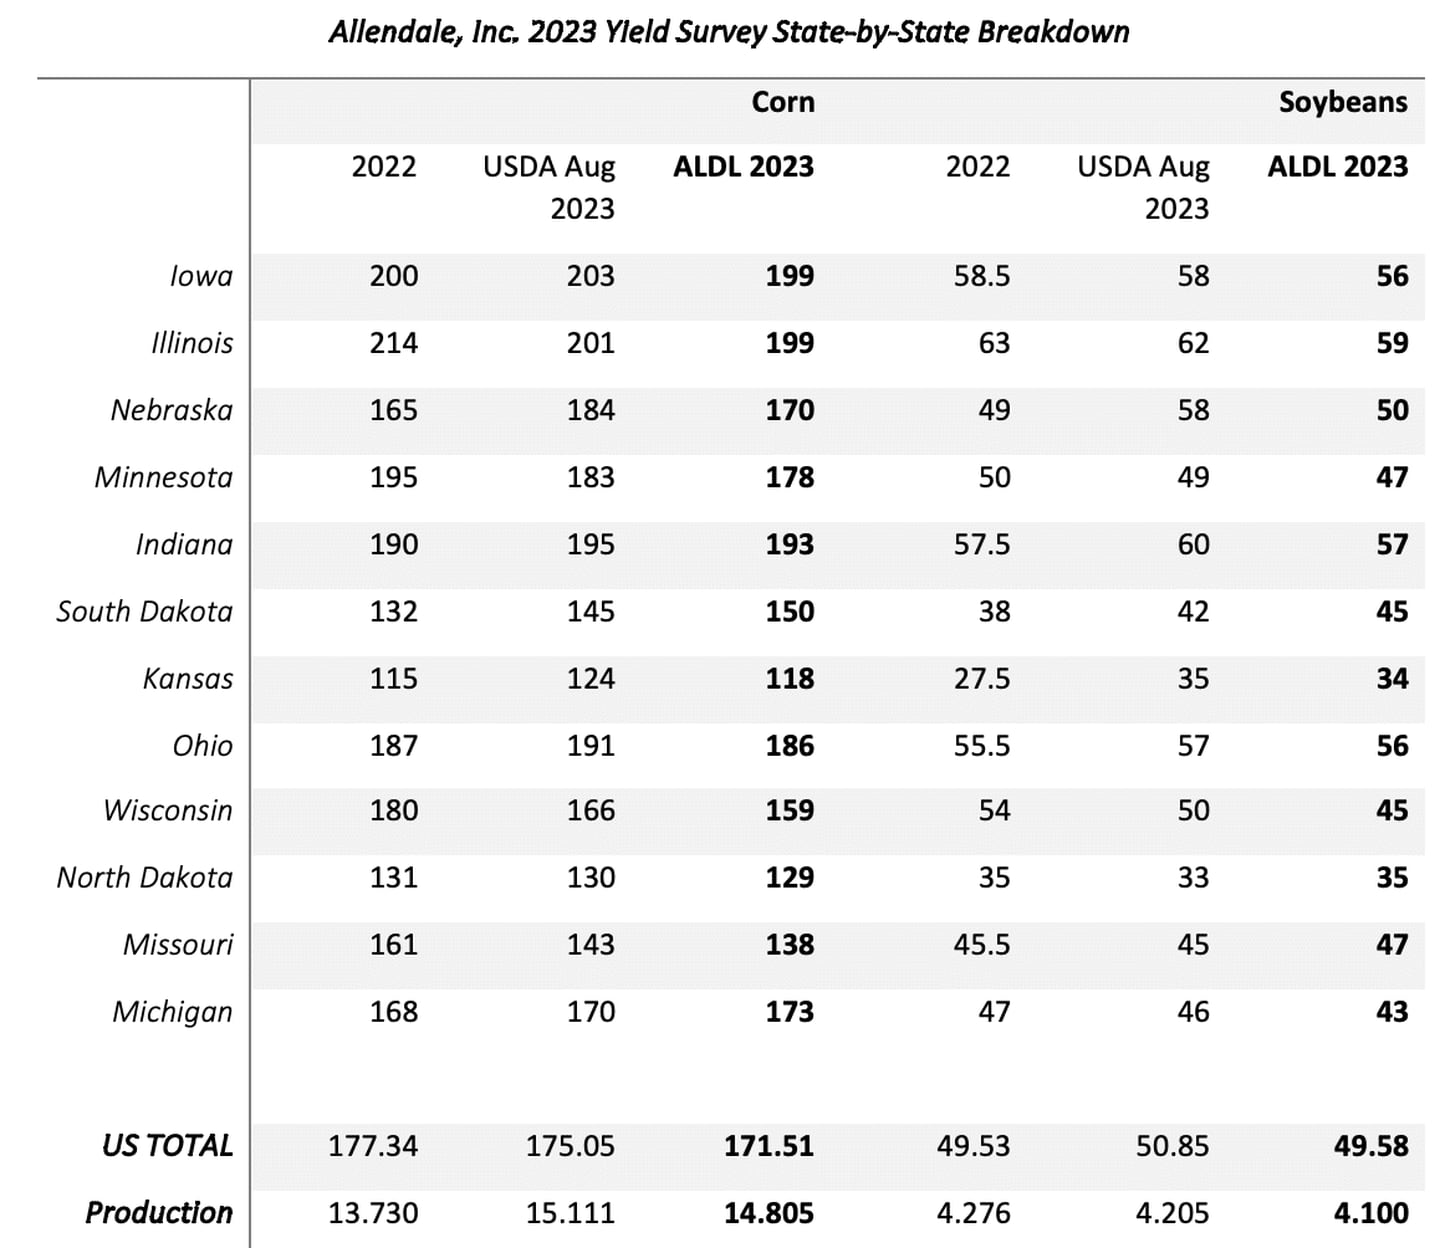 Allendale 2023 state-by-state yield survey